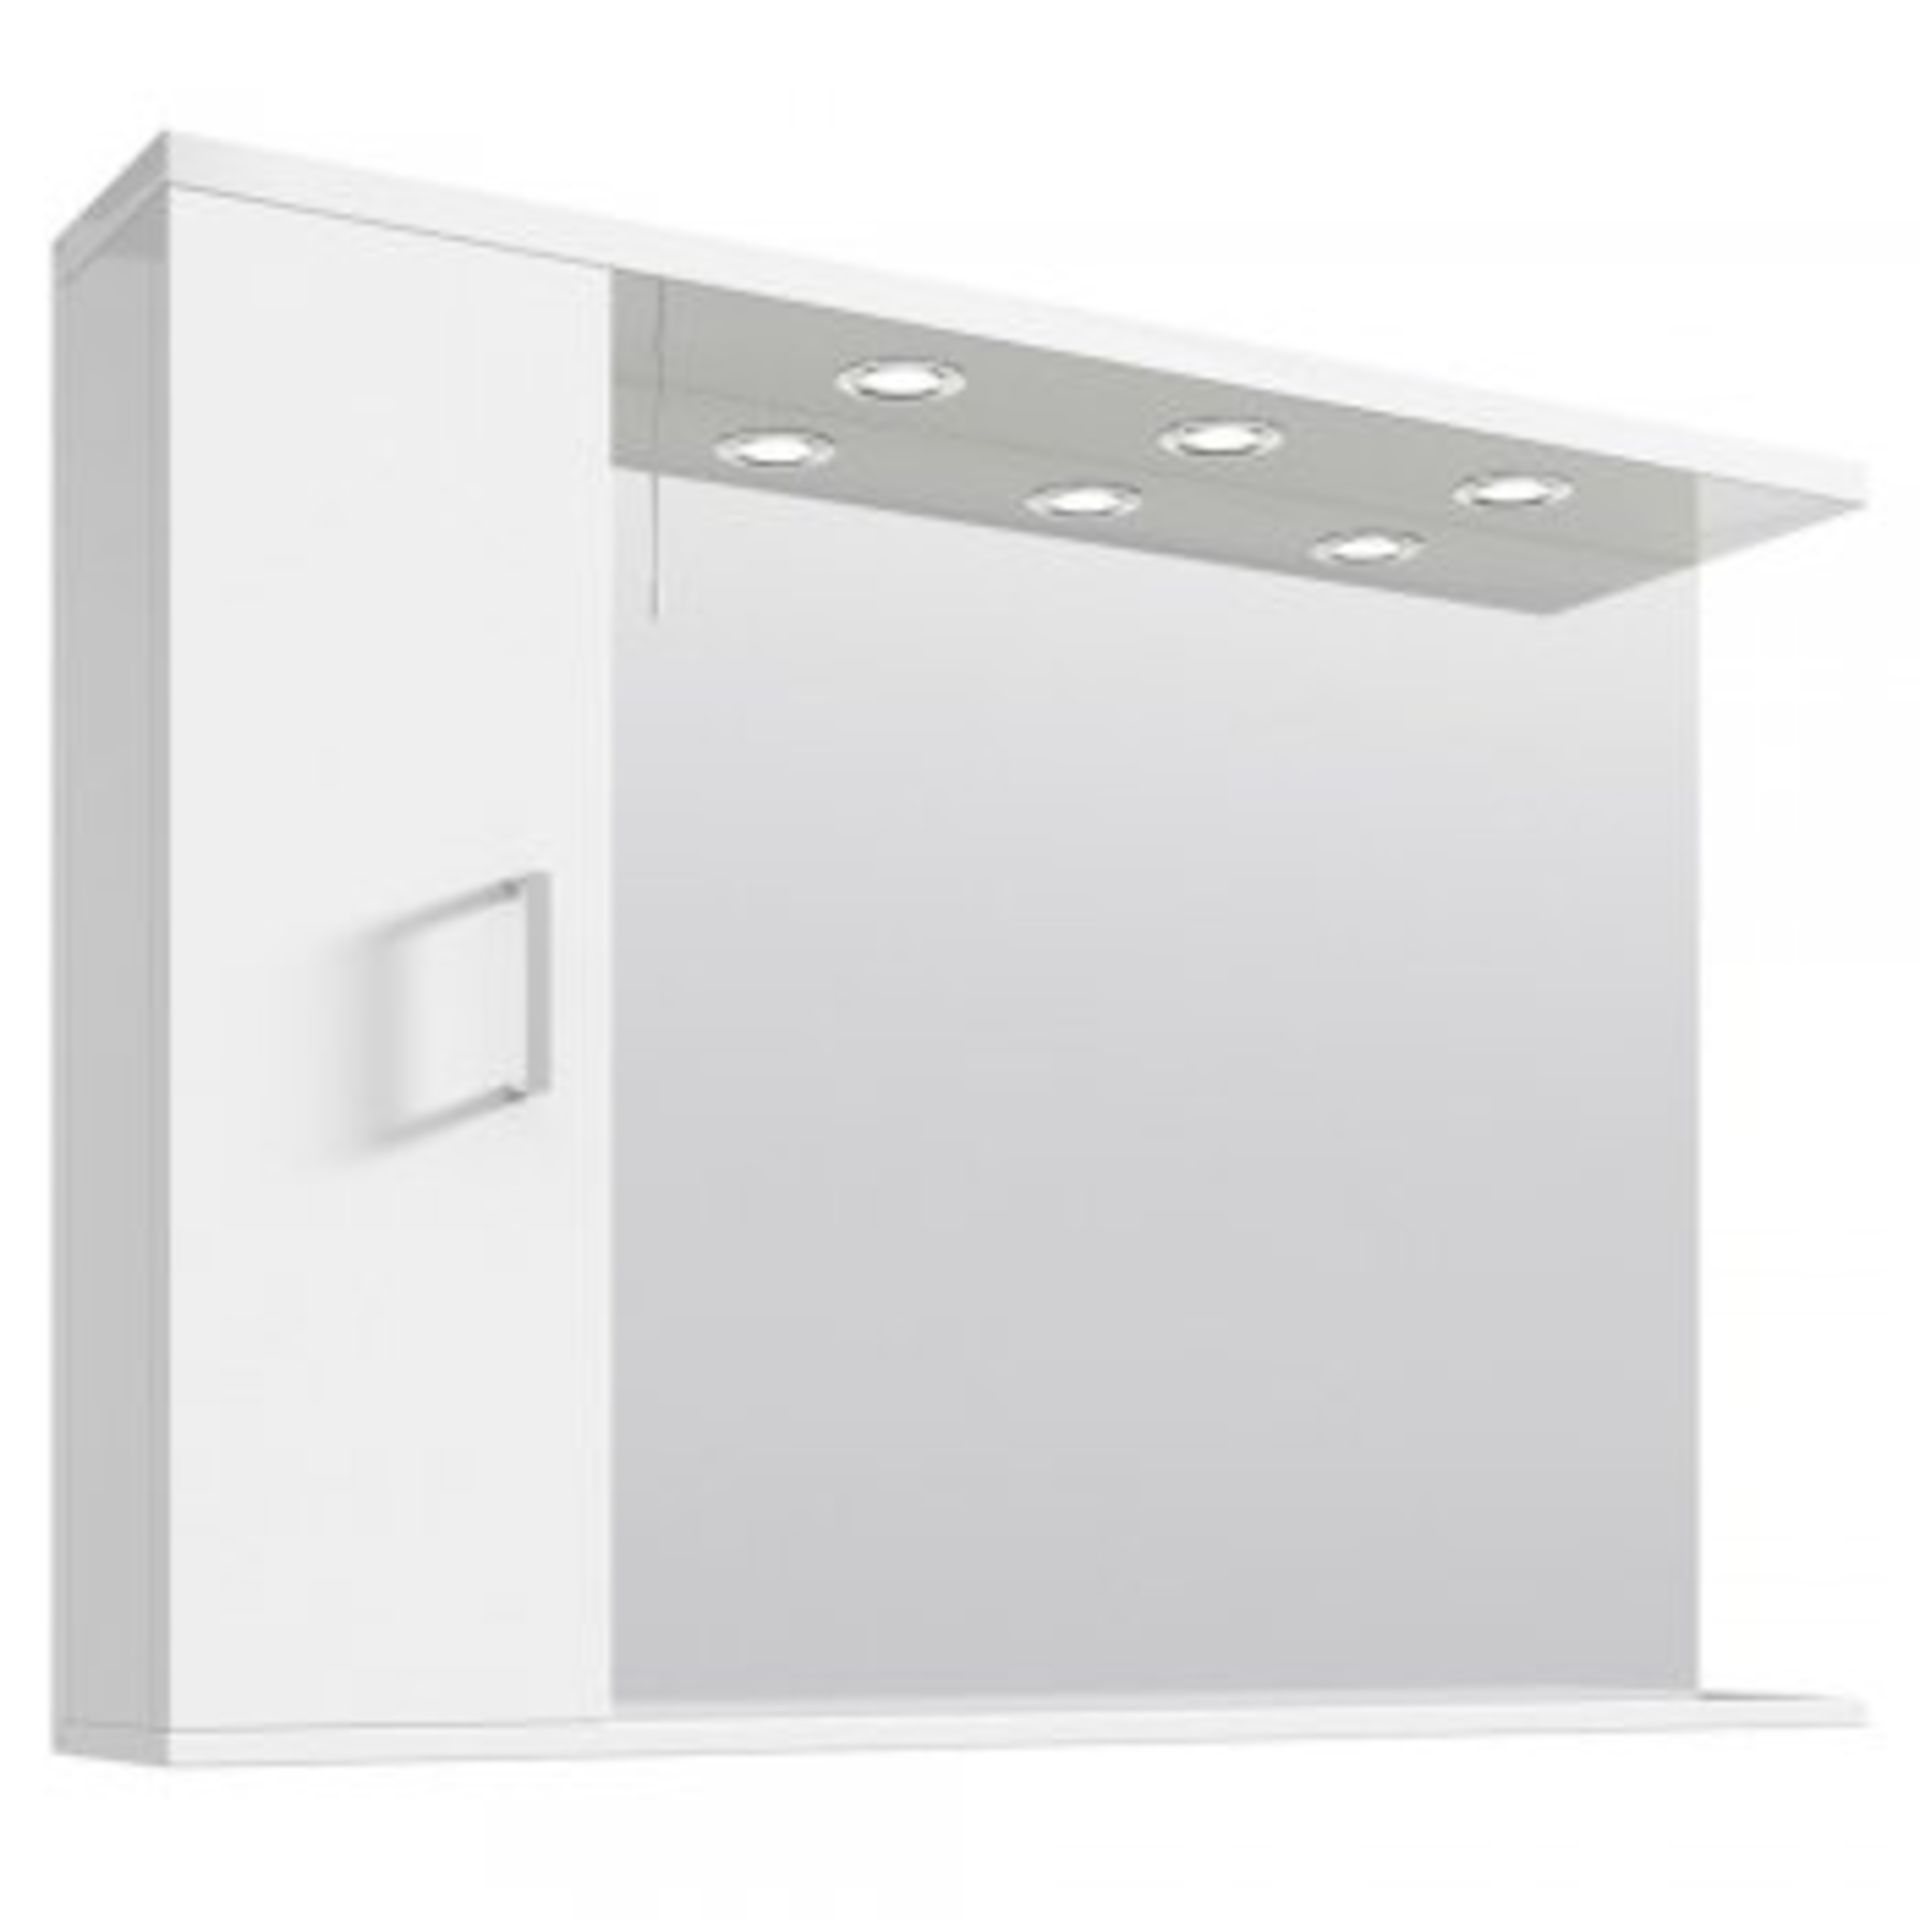 (G190) 850mm Premier Mayford Wall Hung Mirror. RRP £249.99. Add light to your room with this - Image 2 of 3